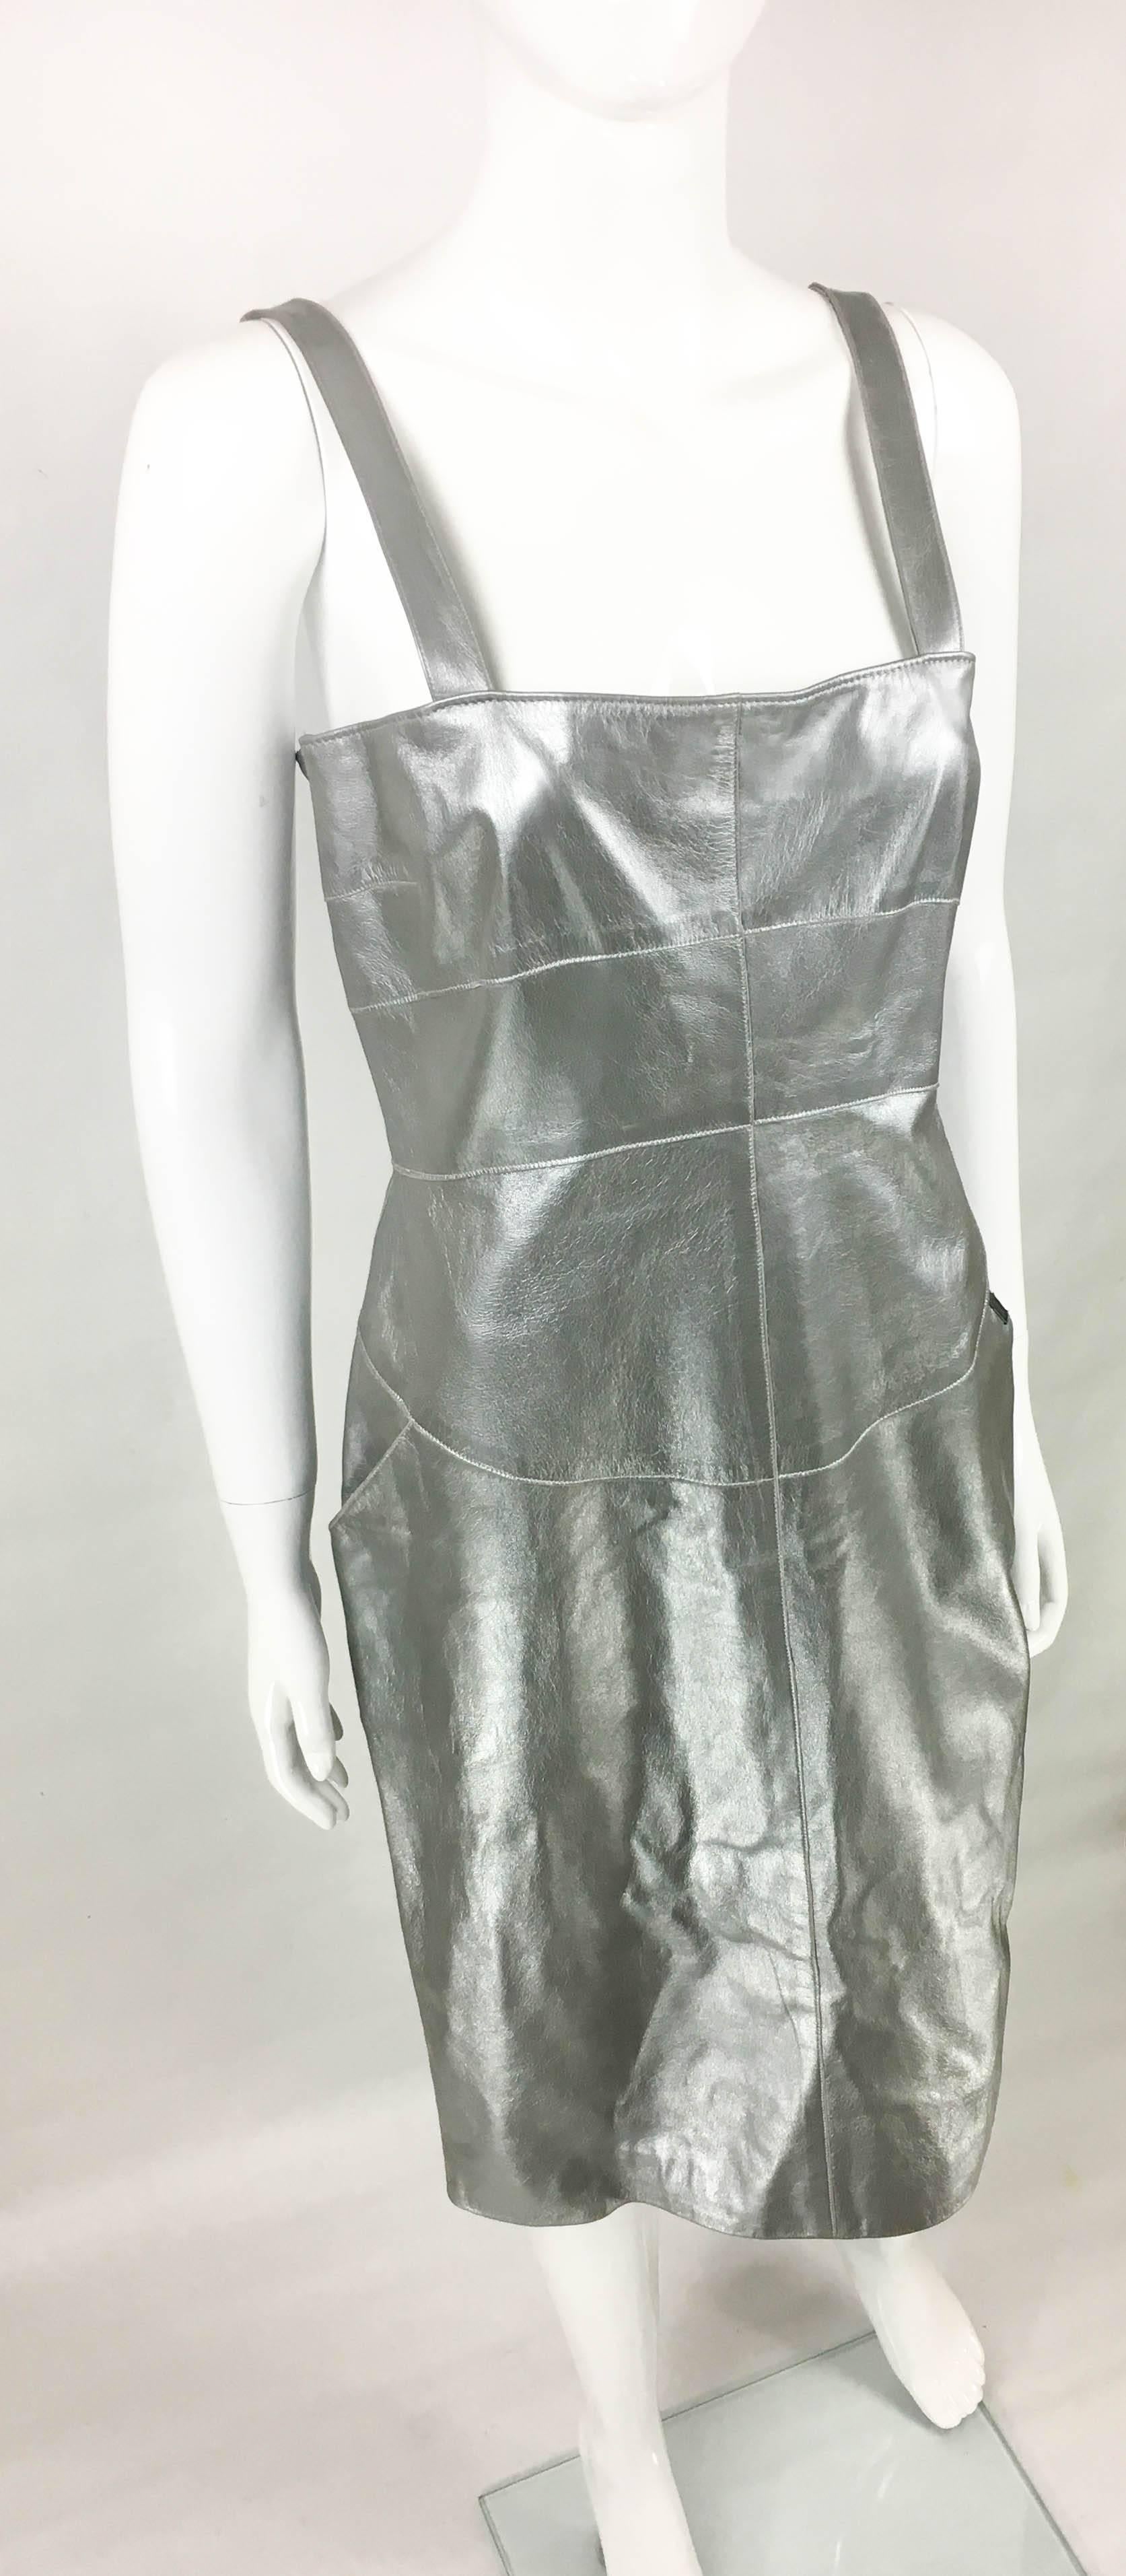 Chanel Runway Silver Lambskin Leather Dress, 1999 In Excellent Condition For Sale In London, Chelsea